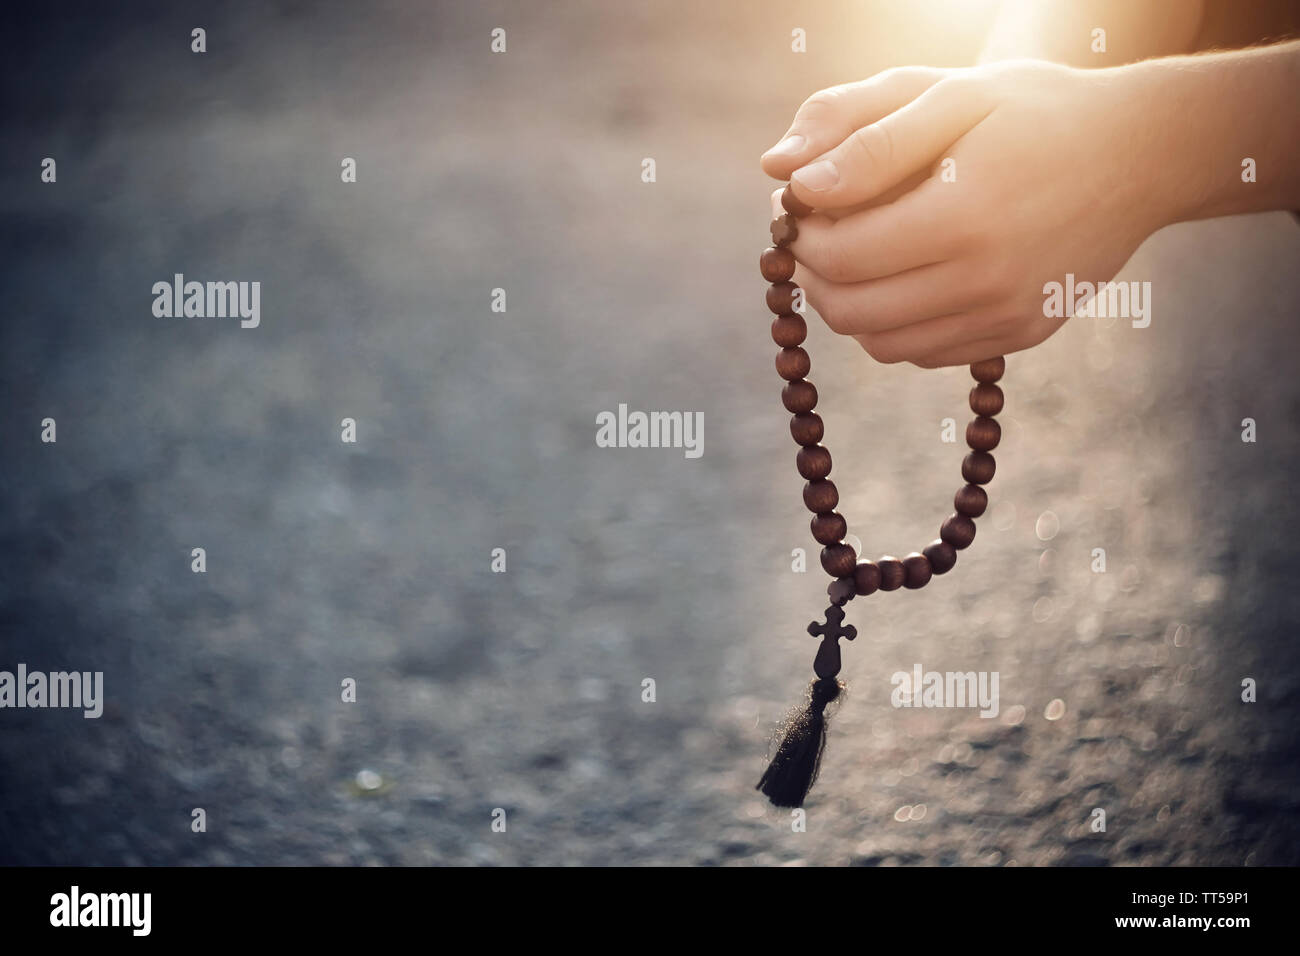 The Christian holds in his hands, folded in prayer, wooden rosaries, on which the light of heavenly illumination falls. Stock Photo